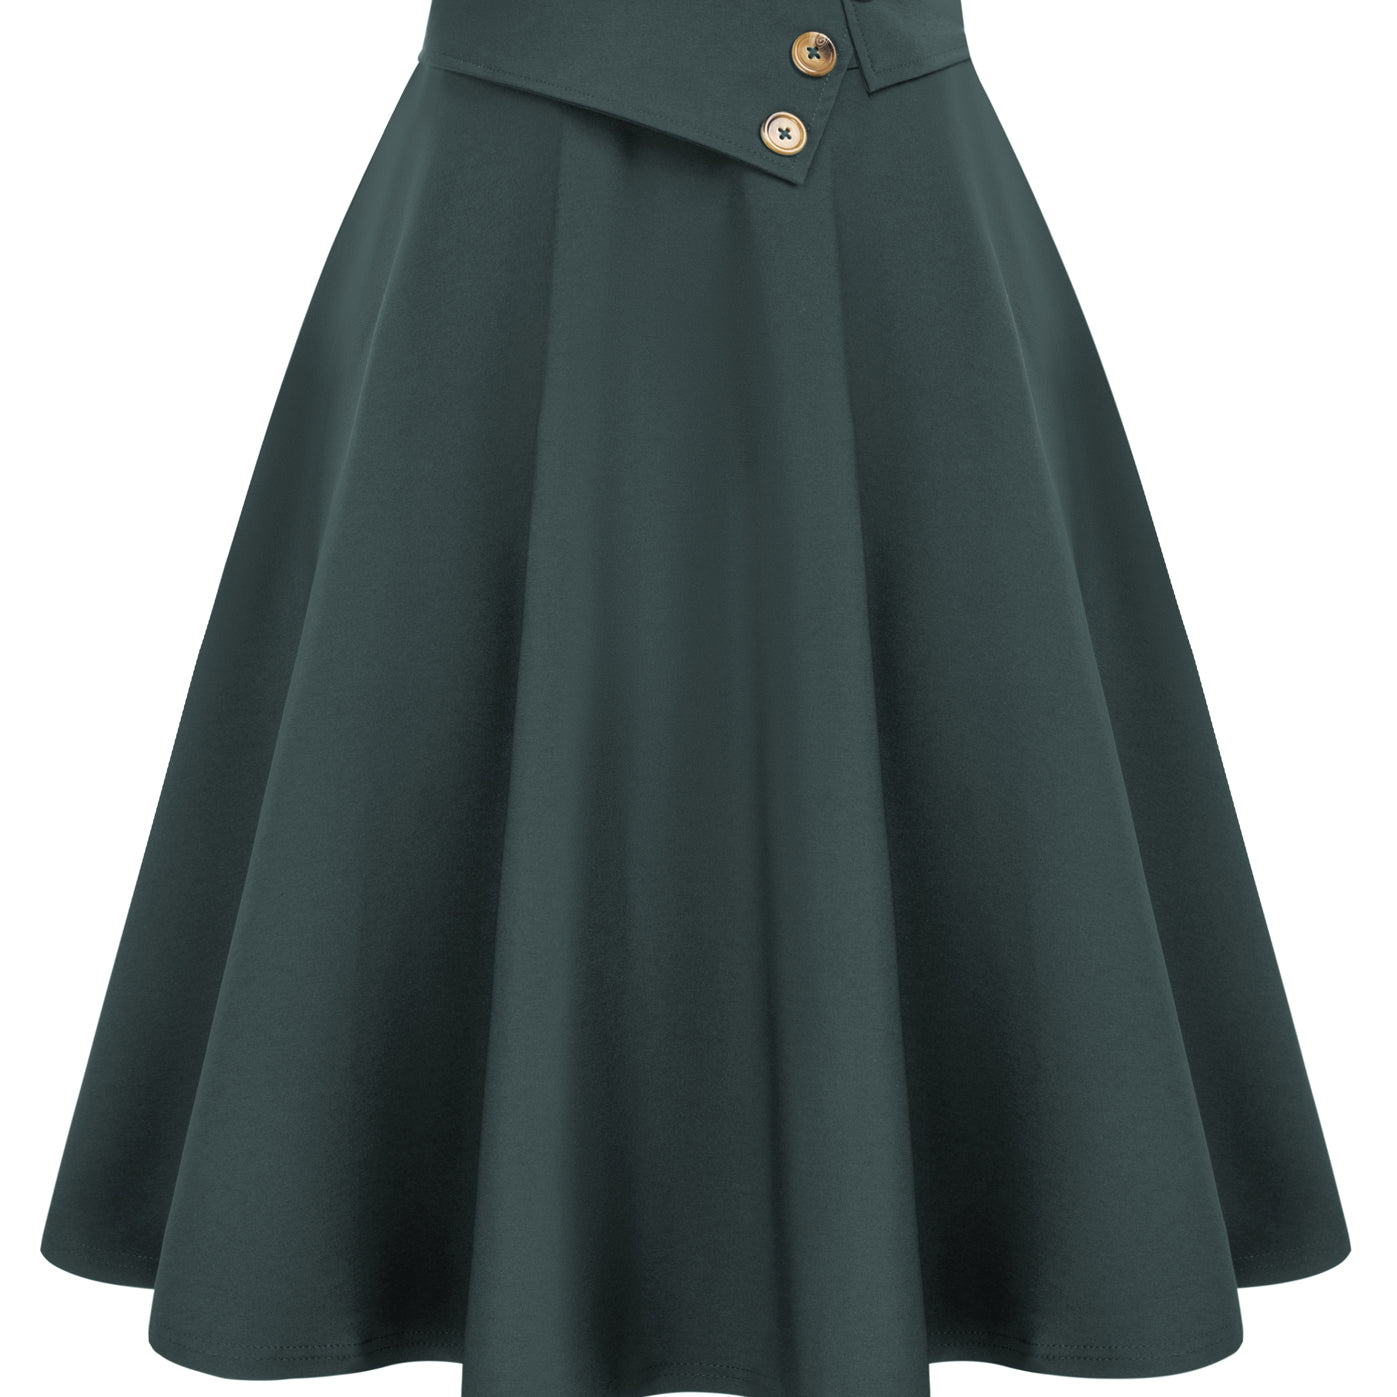 Vintage A-Line Skirt High Waisted Midi Skirt with Pockets & Buttons